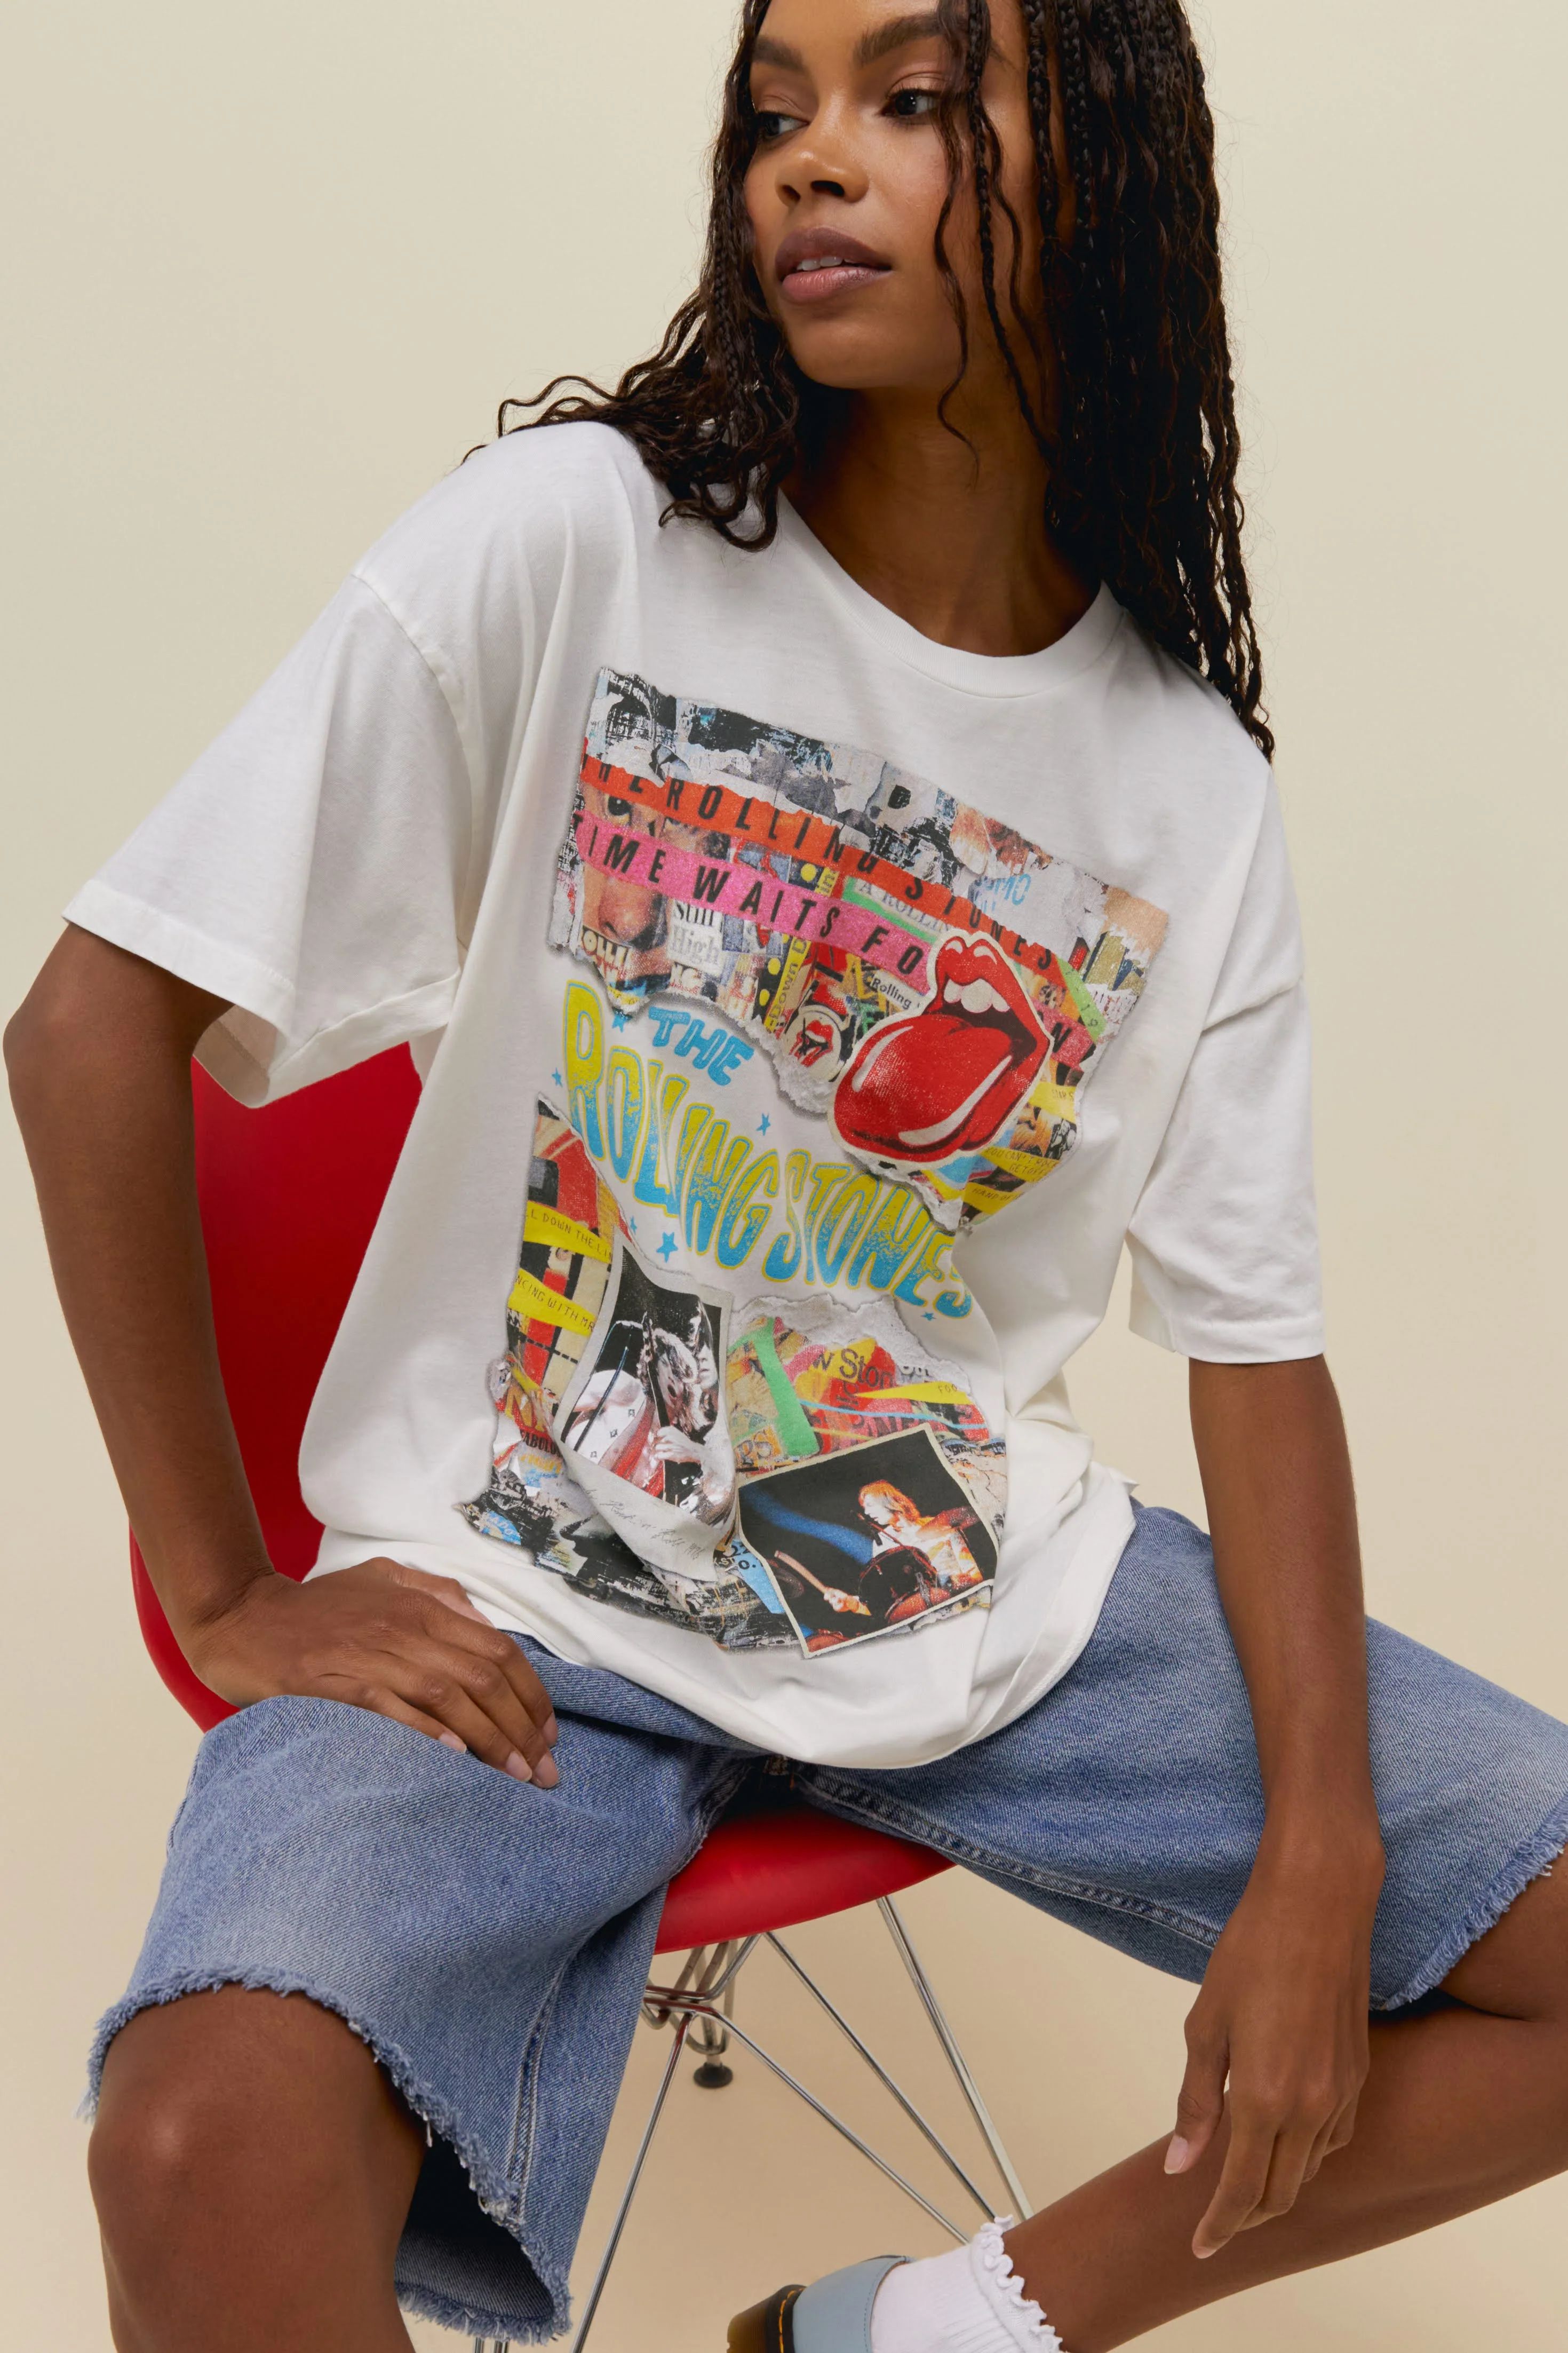 Rolling Stones Time Waits For No One Merch Tee in Vintage White | Daydreamer